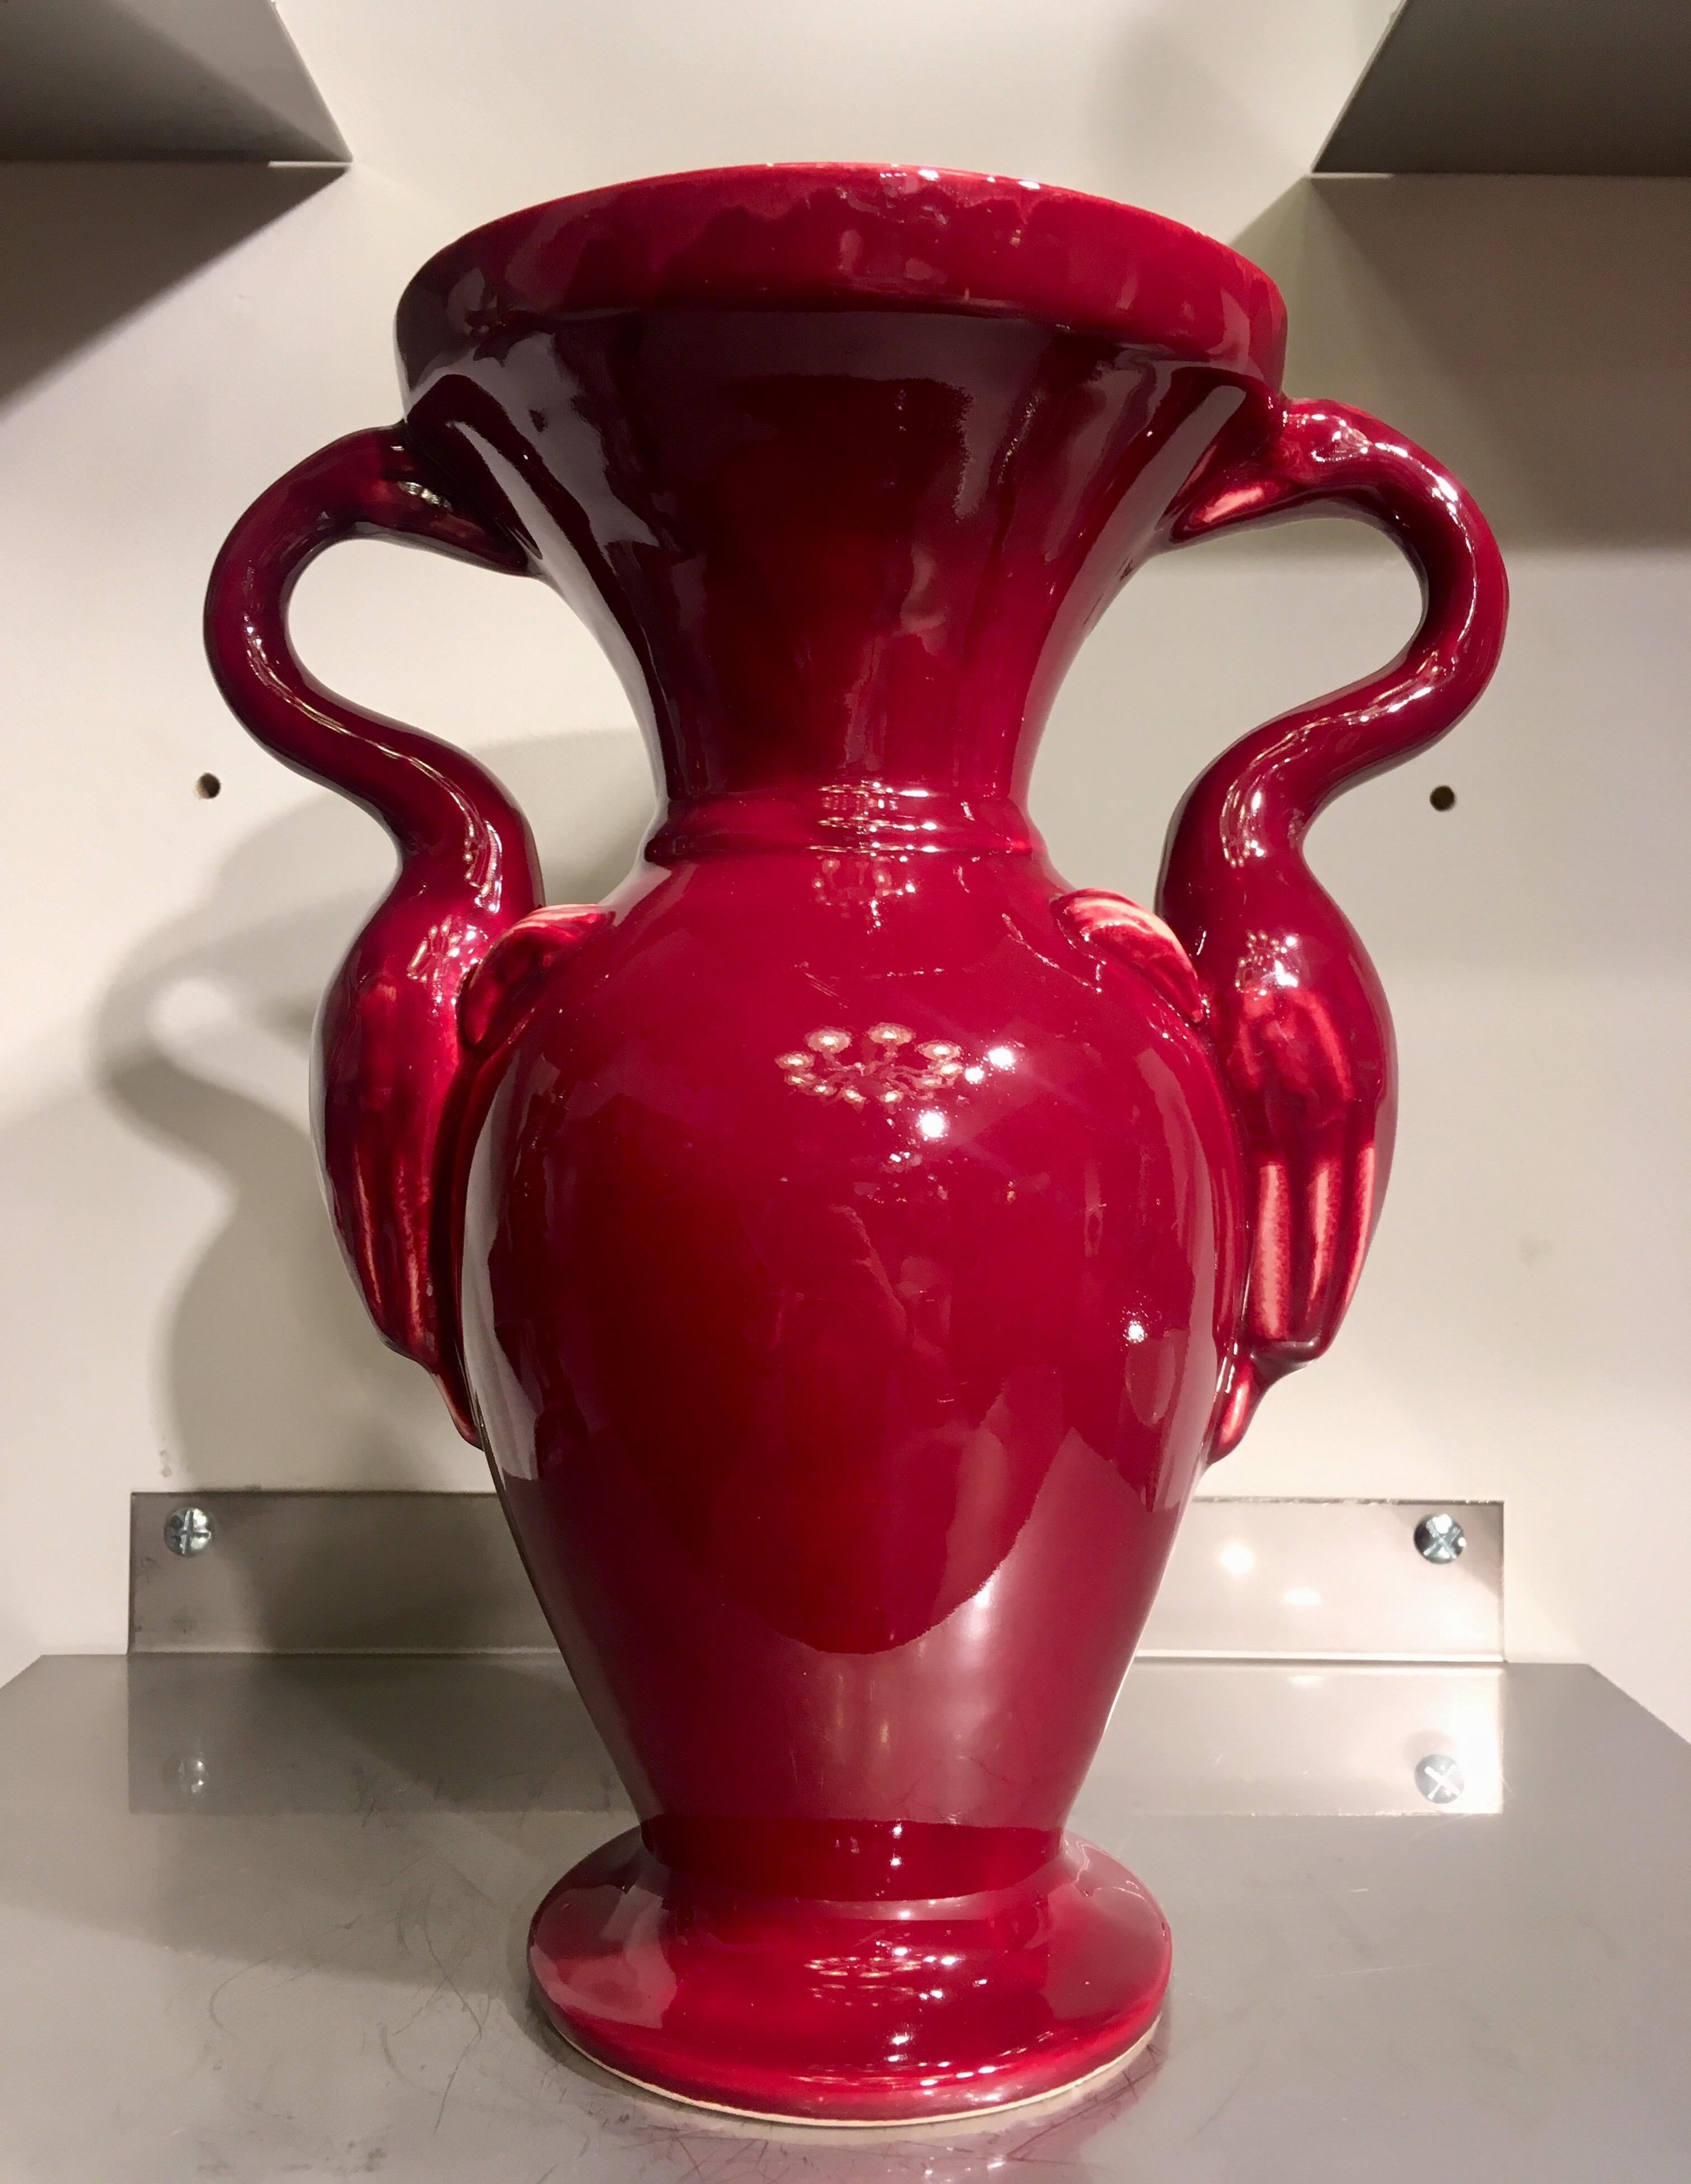 Mid-Century Modern Baluster Vase Red Ceramic with Flamingos Ray Camart, Antibes France, circa 1950 For Sale